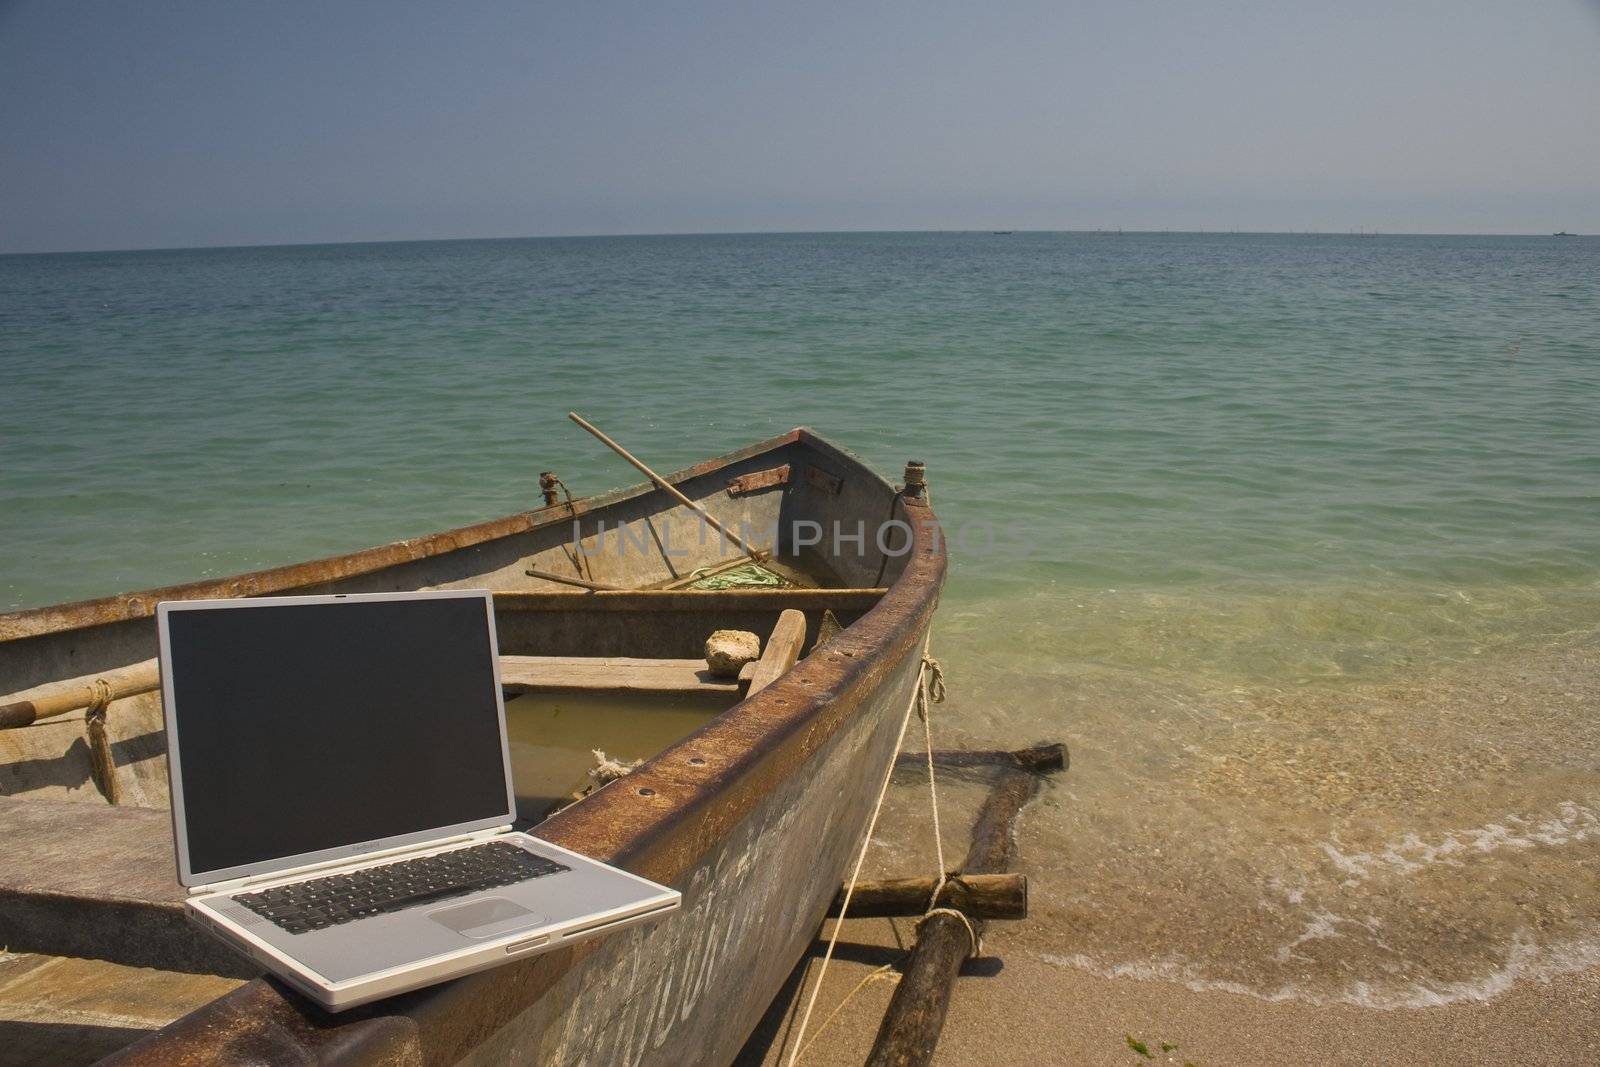 Laptop sitting on side of small fishing boat that is docked on beach